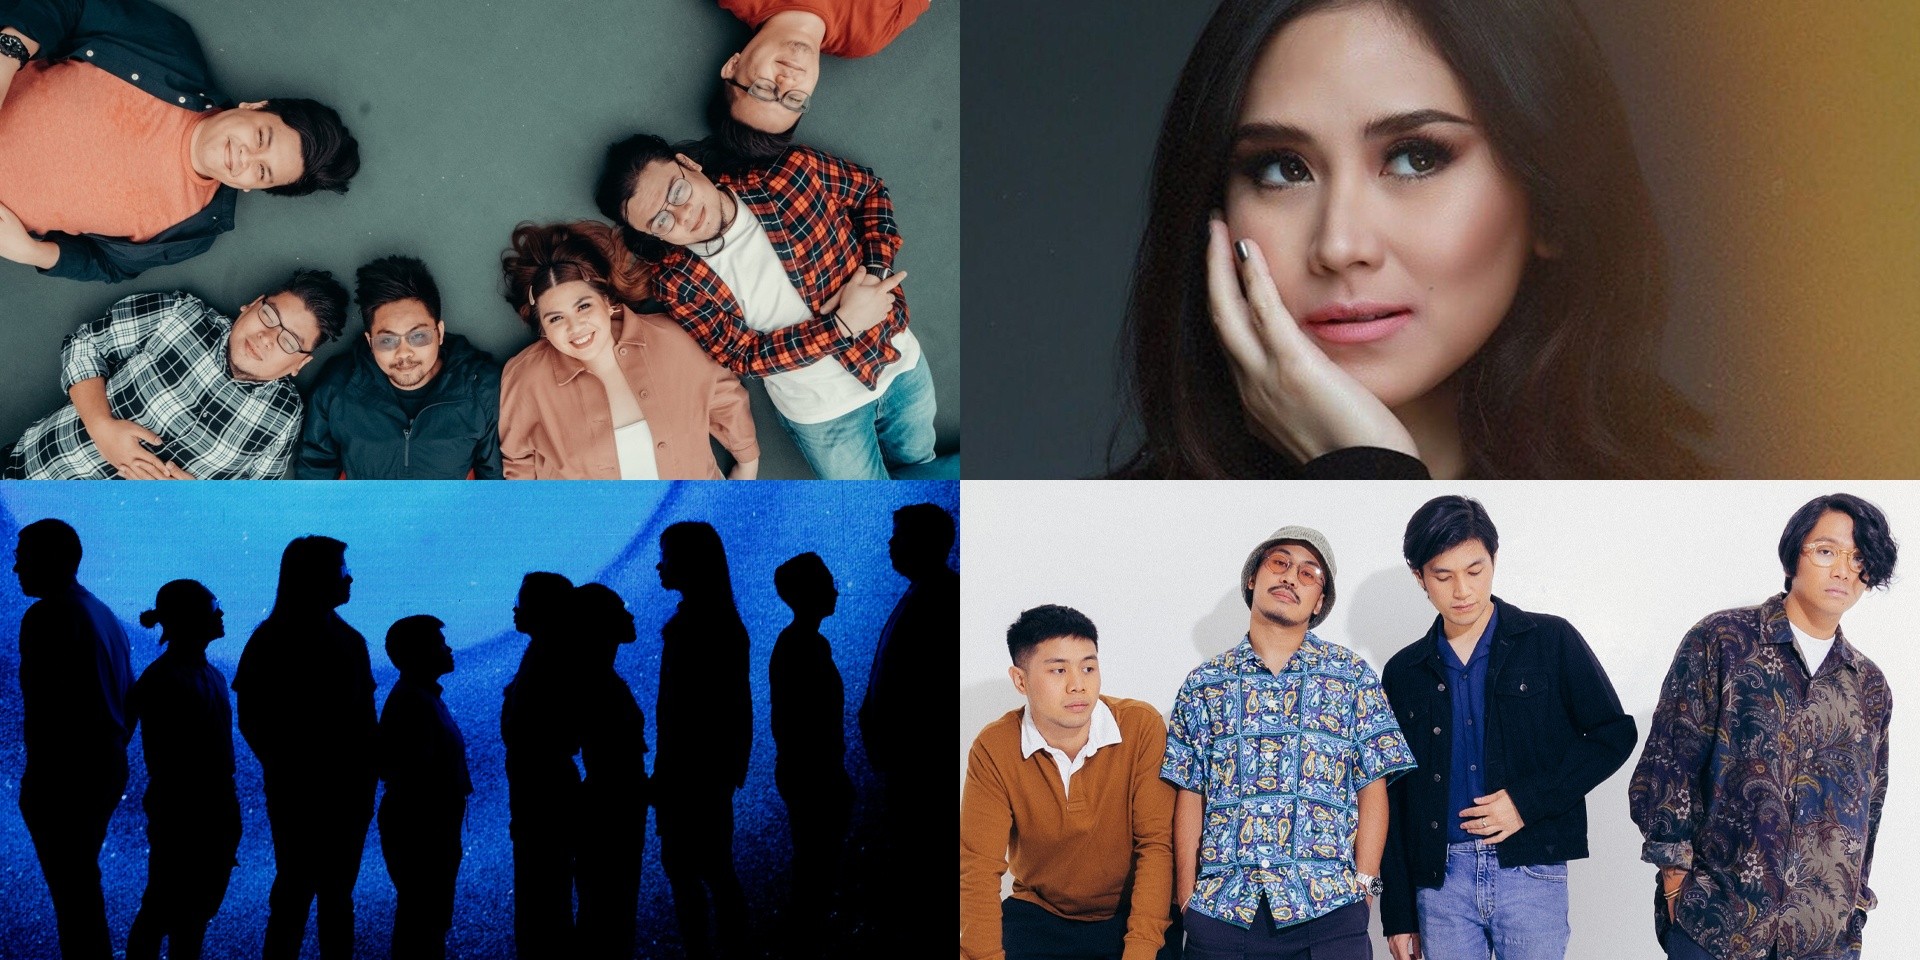 She's Only Sixteen, Autotelic, Sarah Geronimo, Ben&Ben, and more release new music – listen